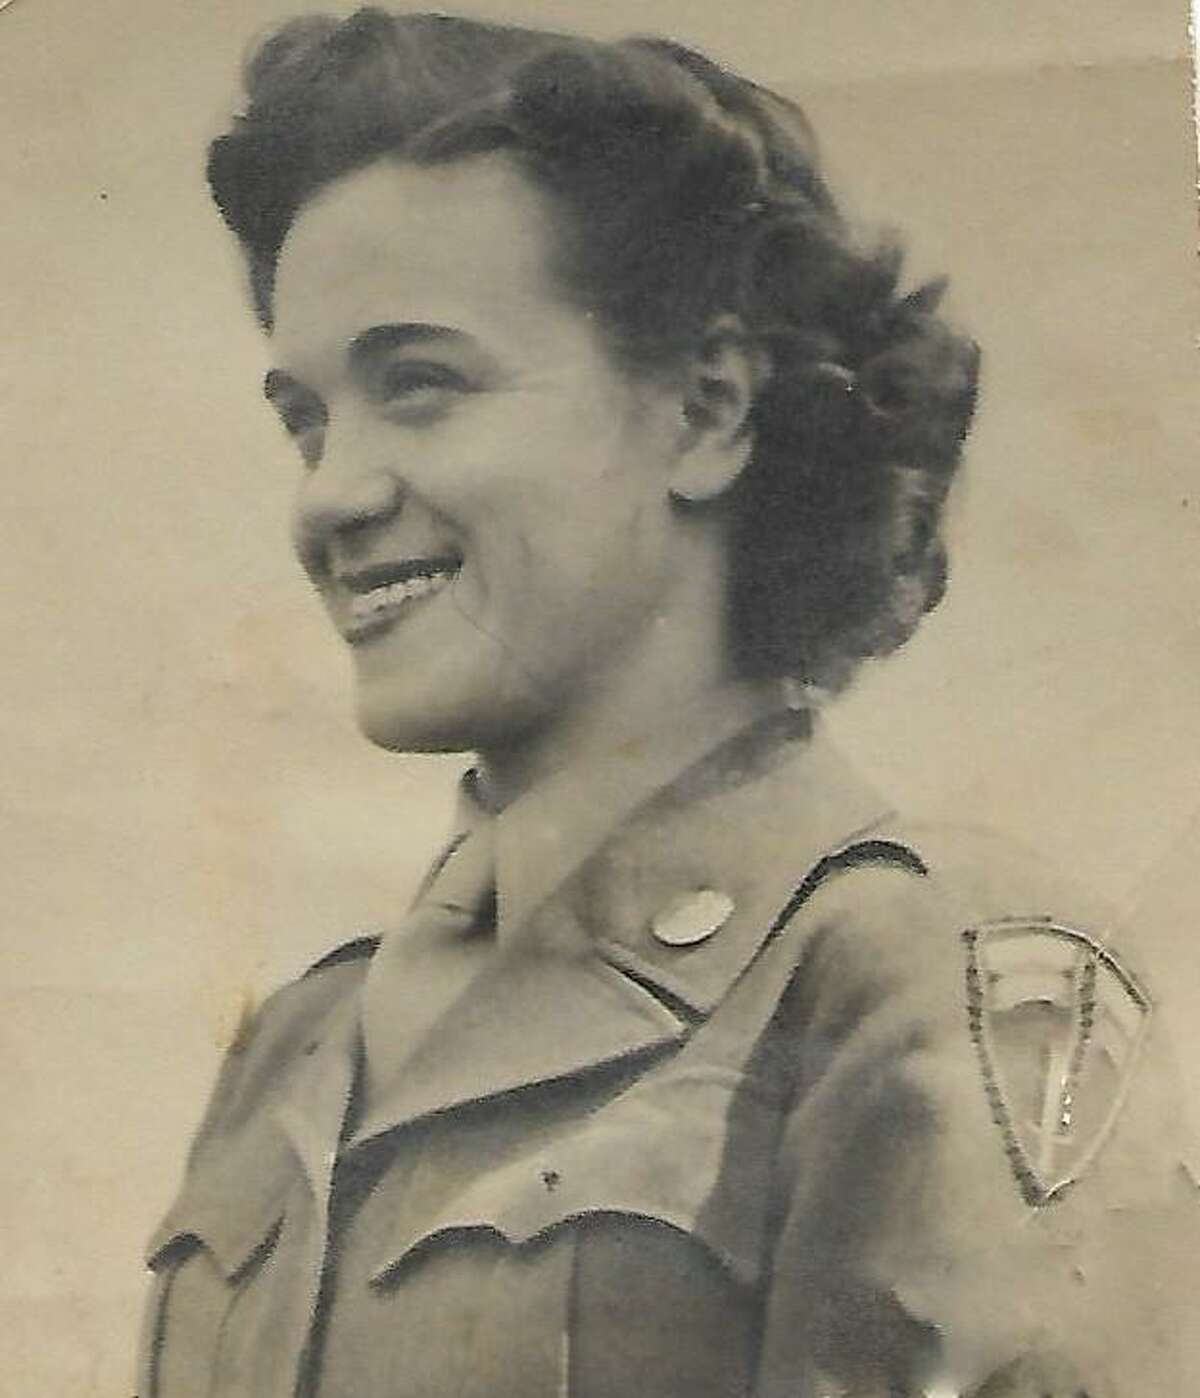 Paula Emma DeGrasse served in the Army Air Forces in Germany just after World War II.